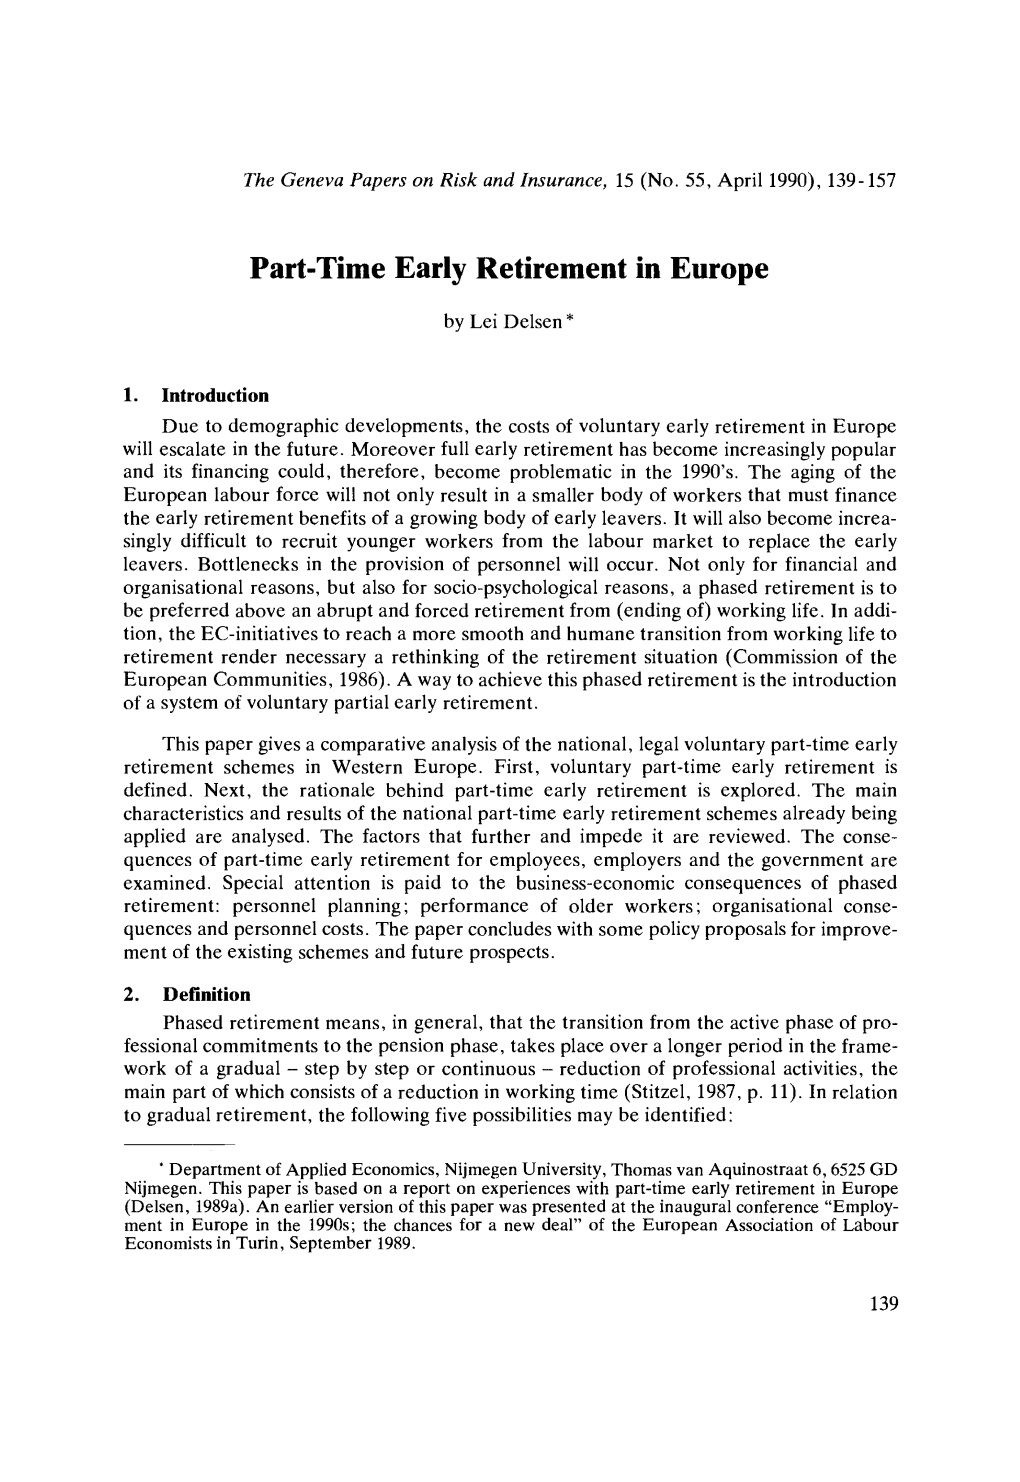 Part-Time Early Retirement in Europe